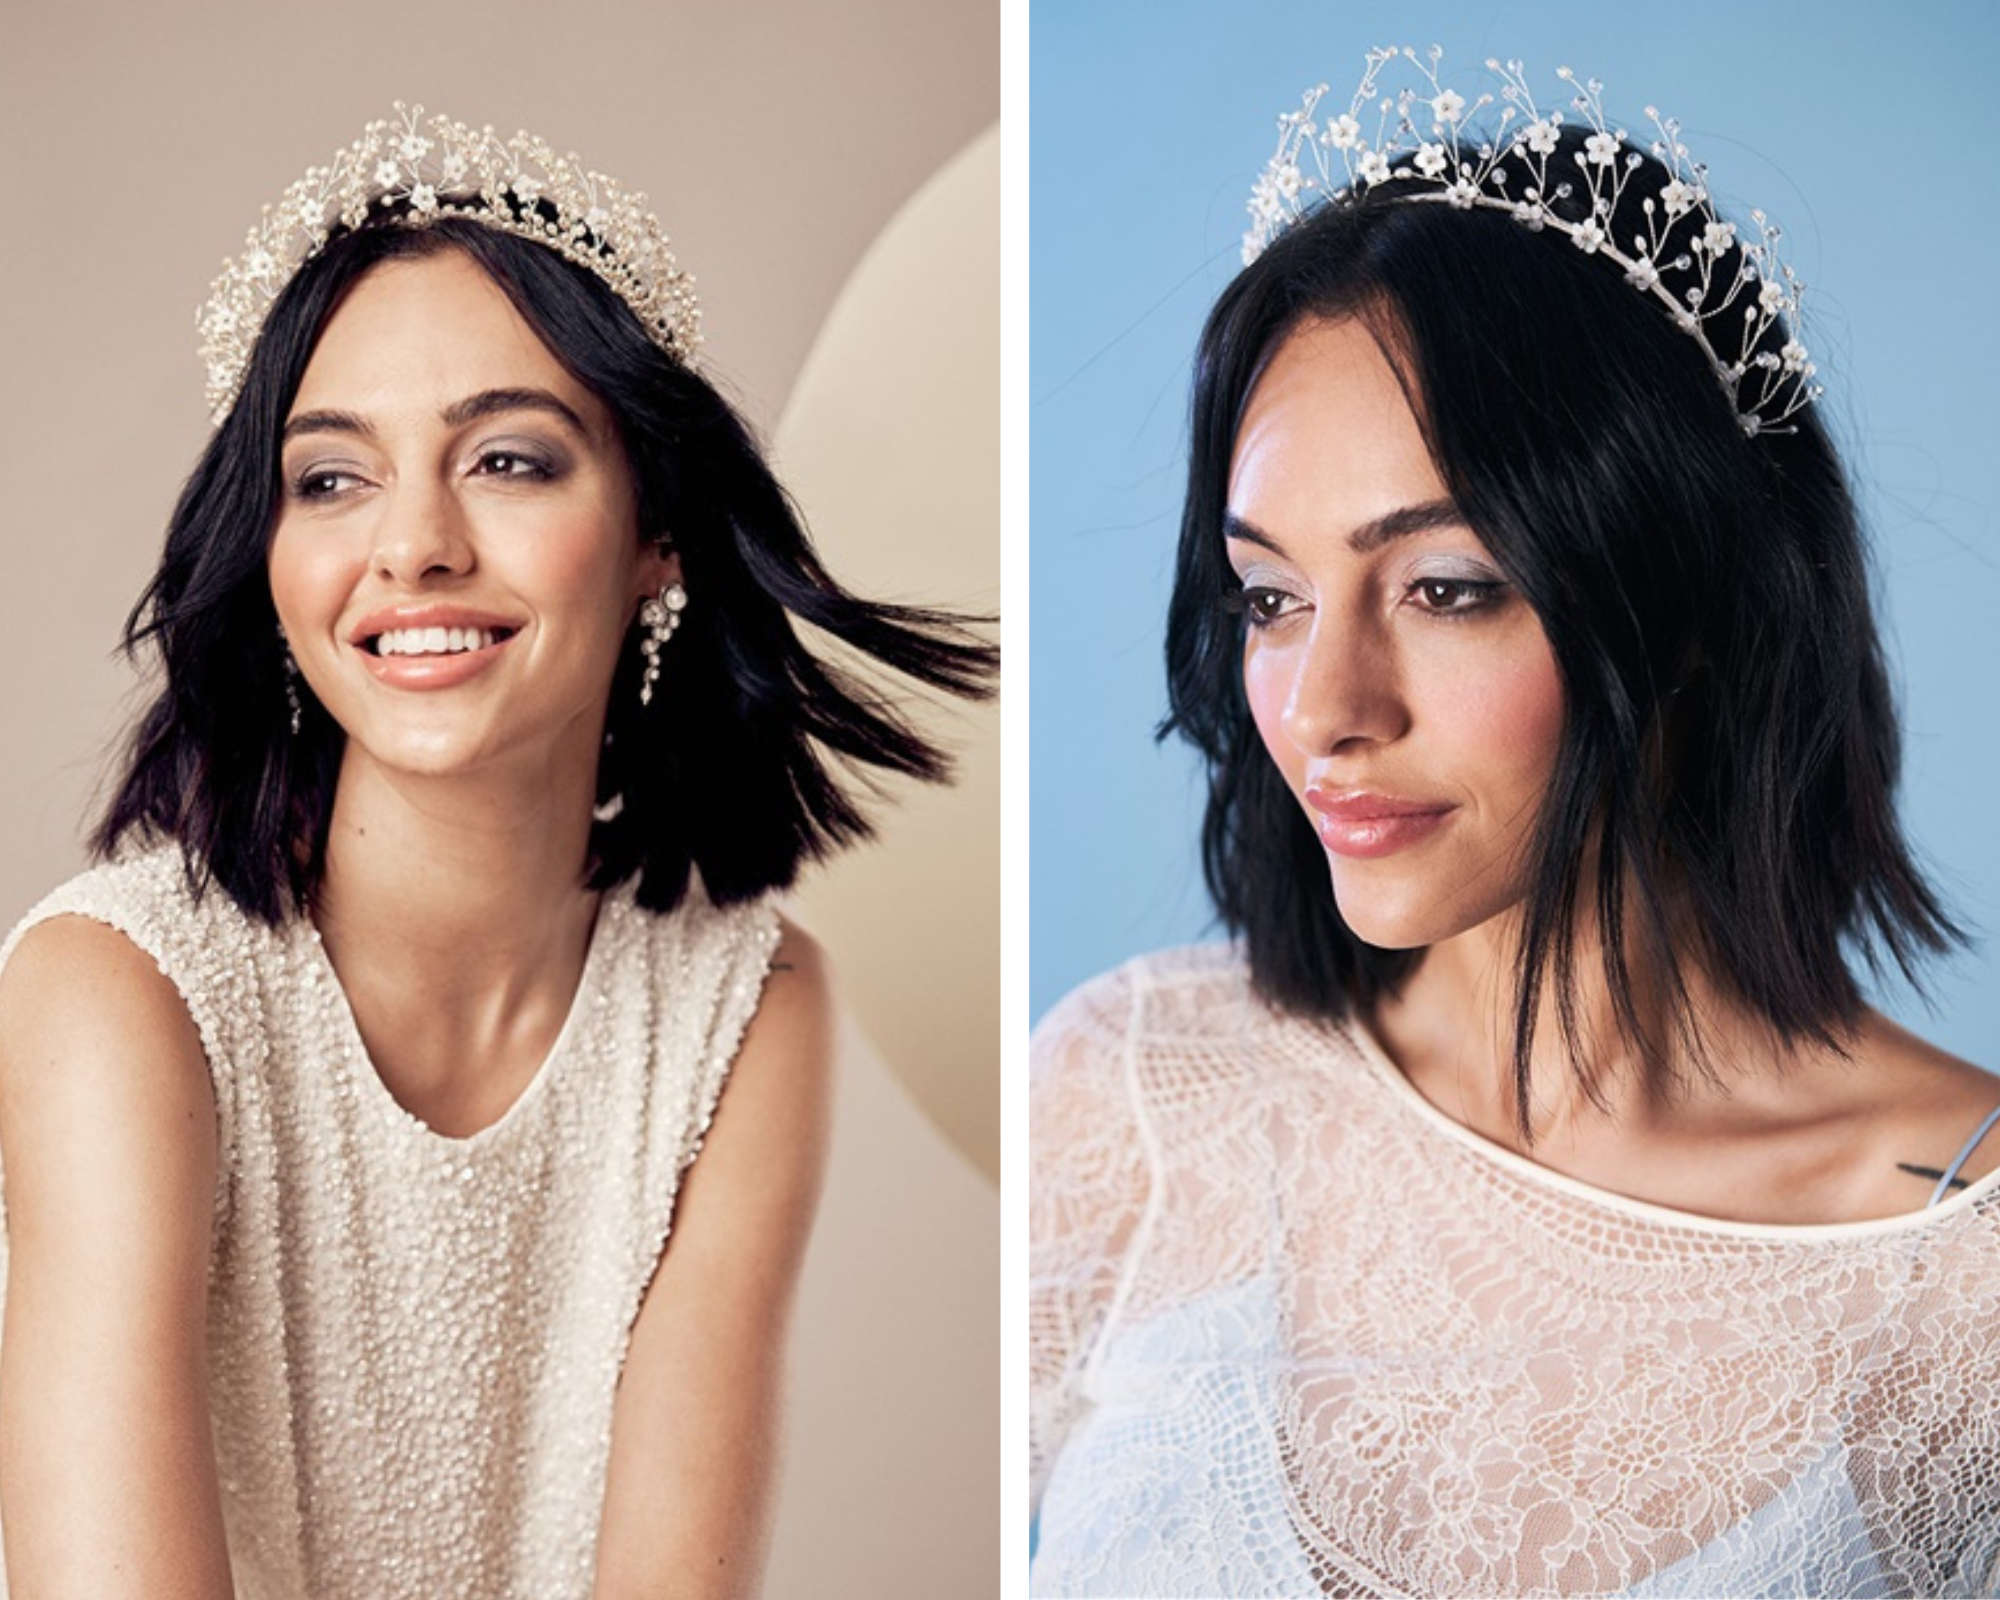  A jewelled crown with flower detailing is a more delicate way to wear a flower crown with short hair cuts - I love to see a crown with a crop of short bob and there is the added bonus of it being incredibly easy to wear as you simply lower it into place!